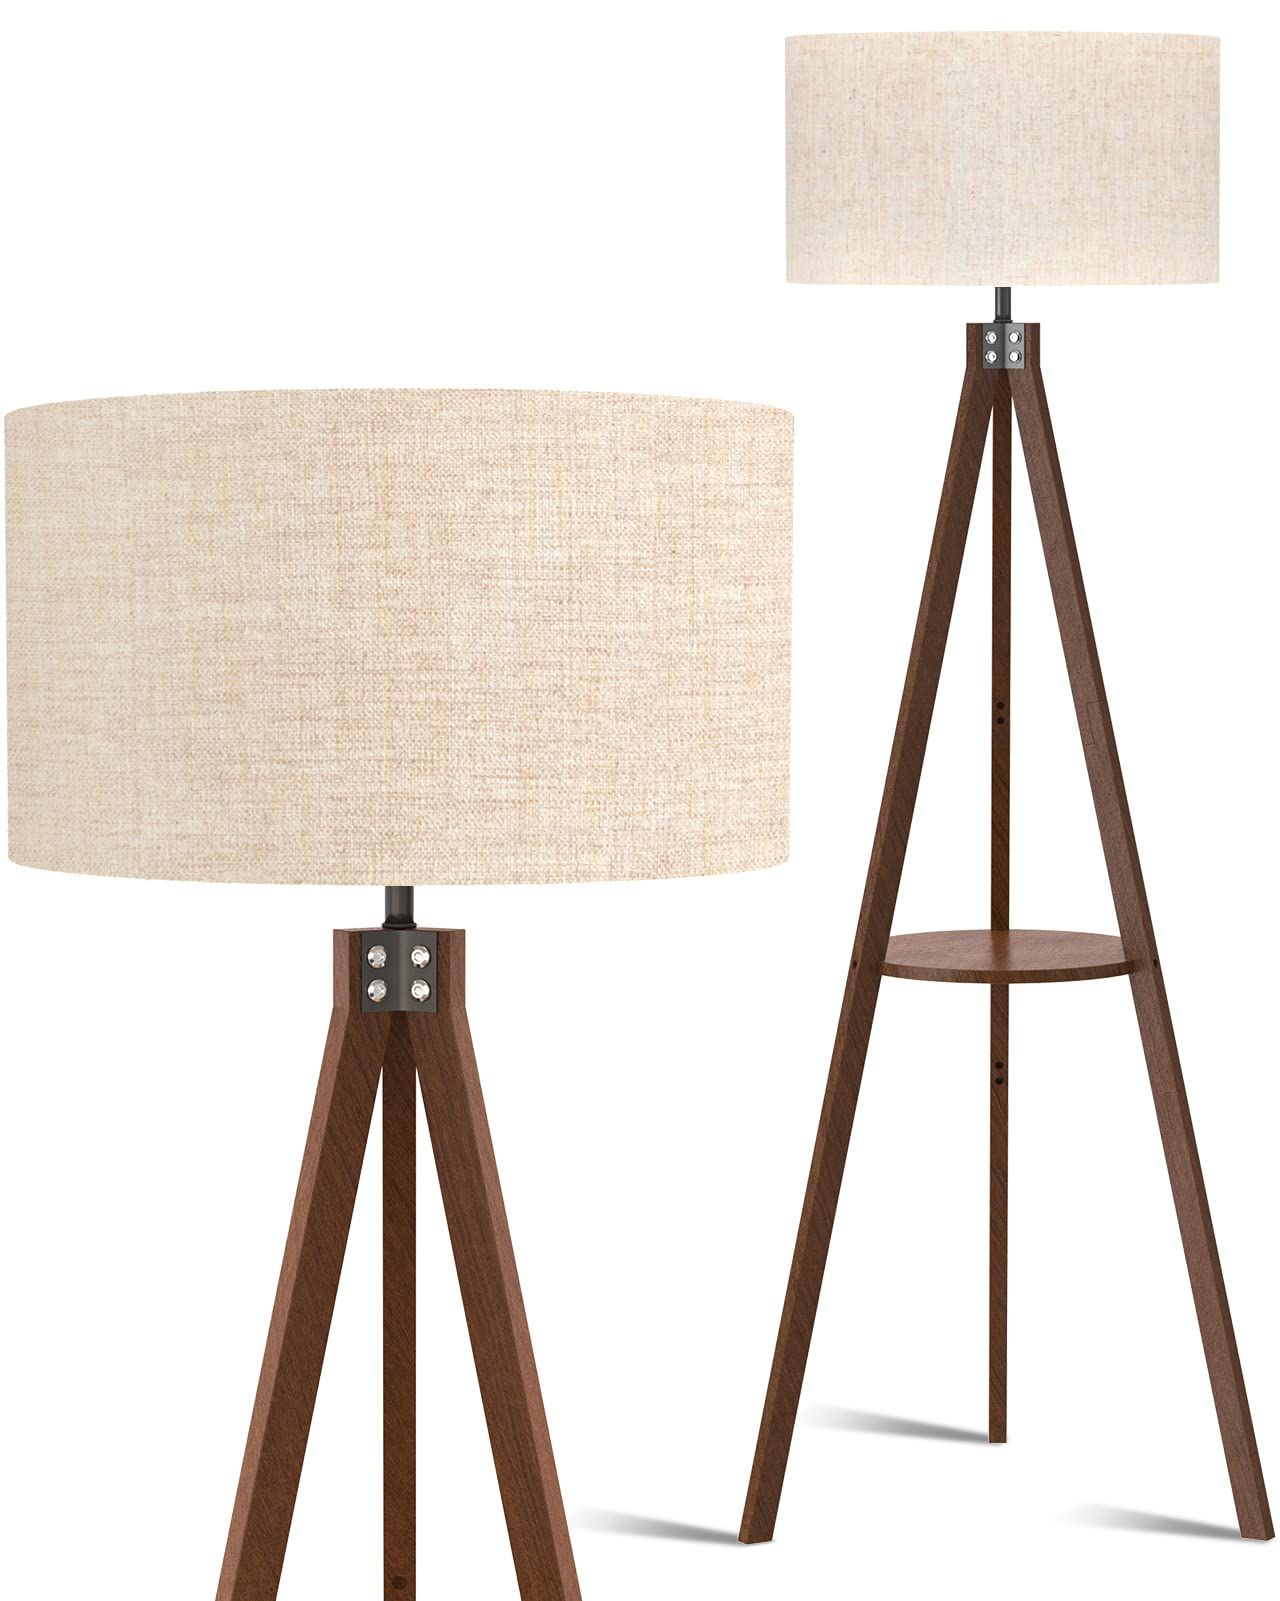 Well Liked Tripod Standing Lamps With Regard To Lepower Tripod Floor Lamp, Mid Century Standing Lamp With Shelf, Modern  Design Wood Floor Lamps For (View 5 of 15)